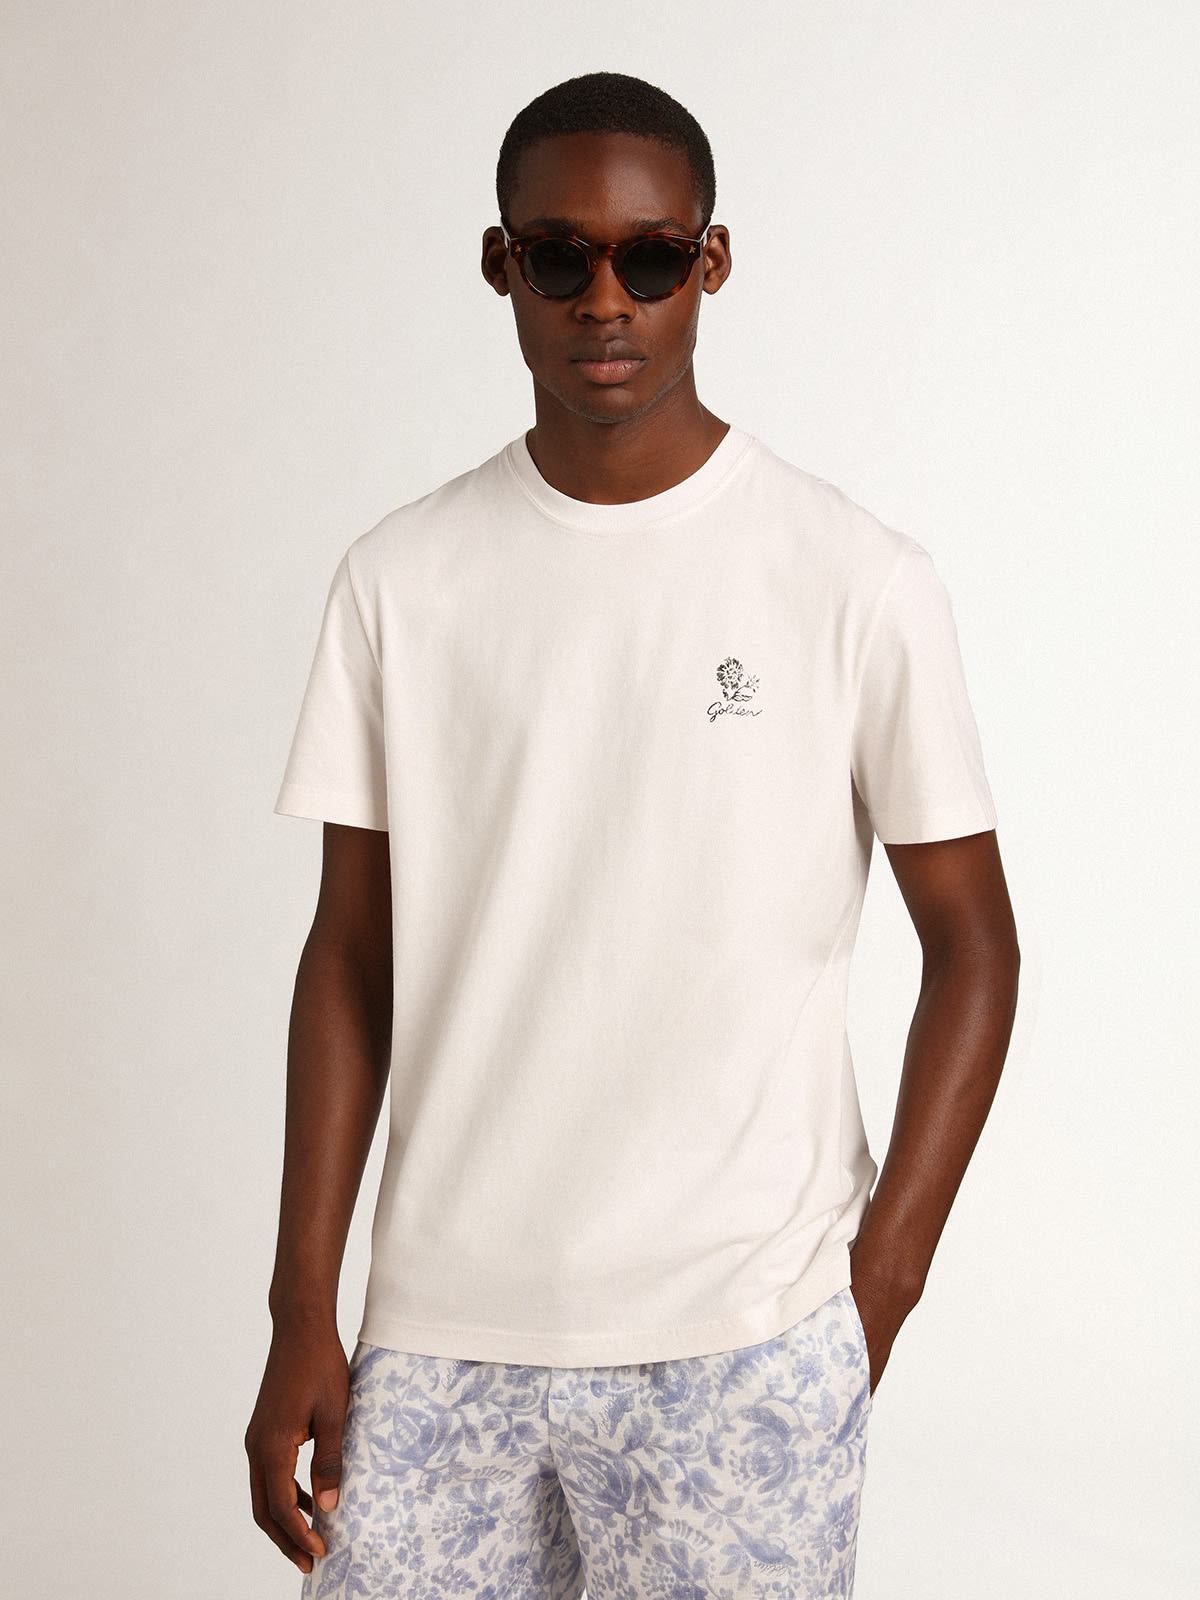 Golden Goose - Resort Collection linen T-shirt in vintage white cotton with printed flower in 